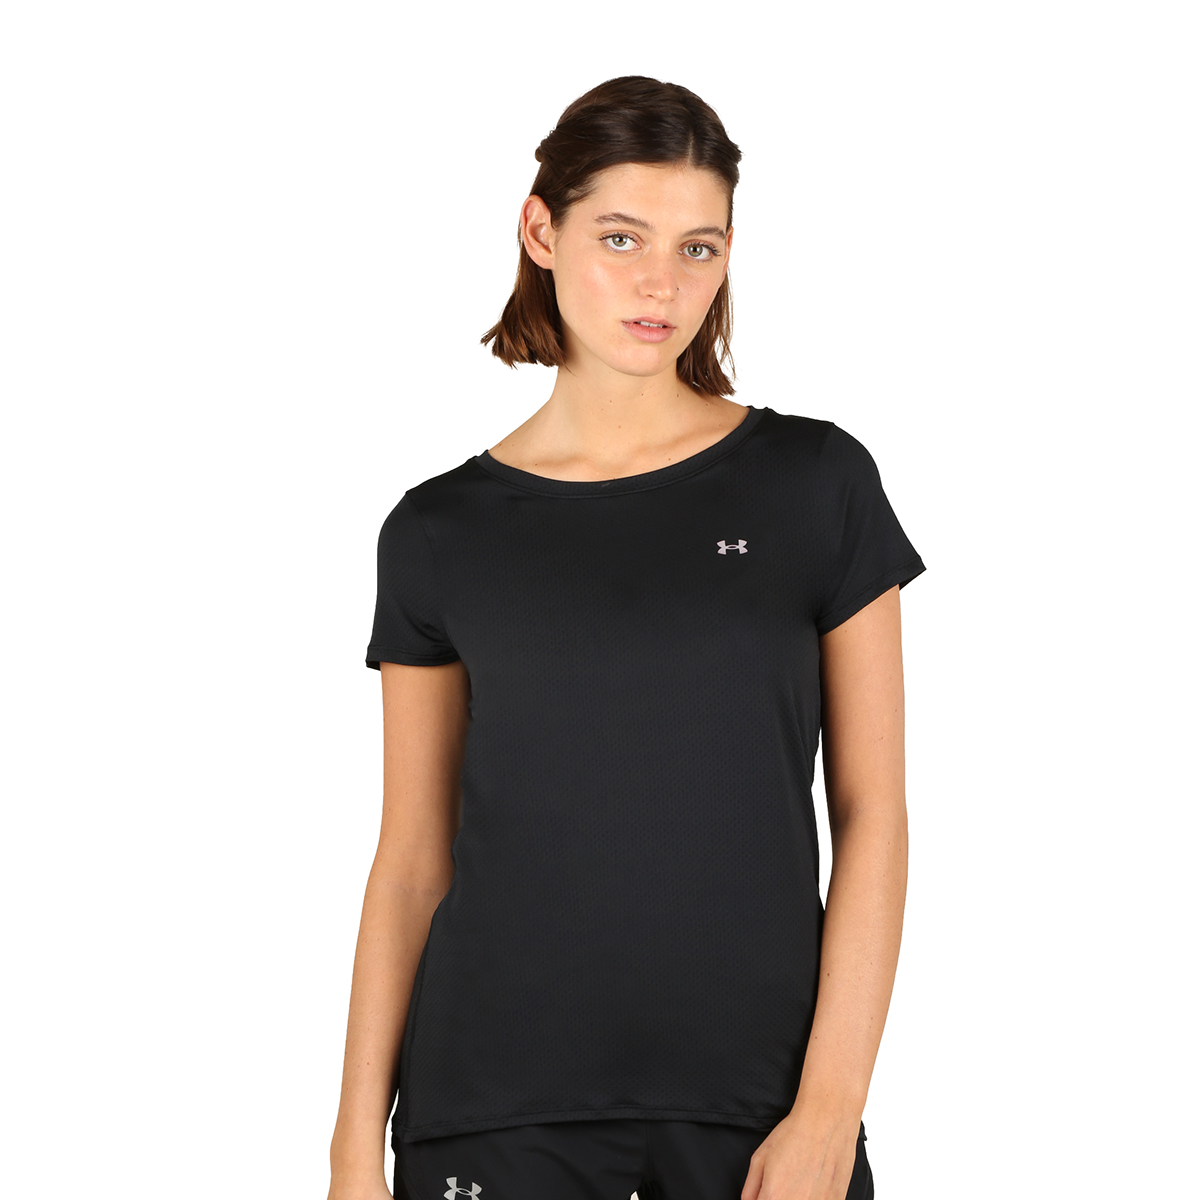 remera under armour mujer > Off-56%